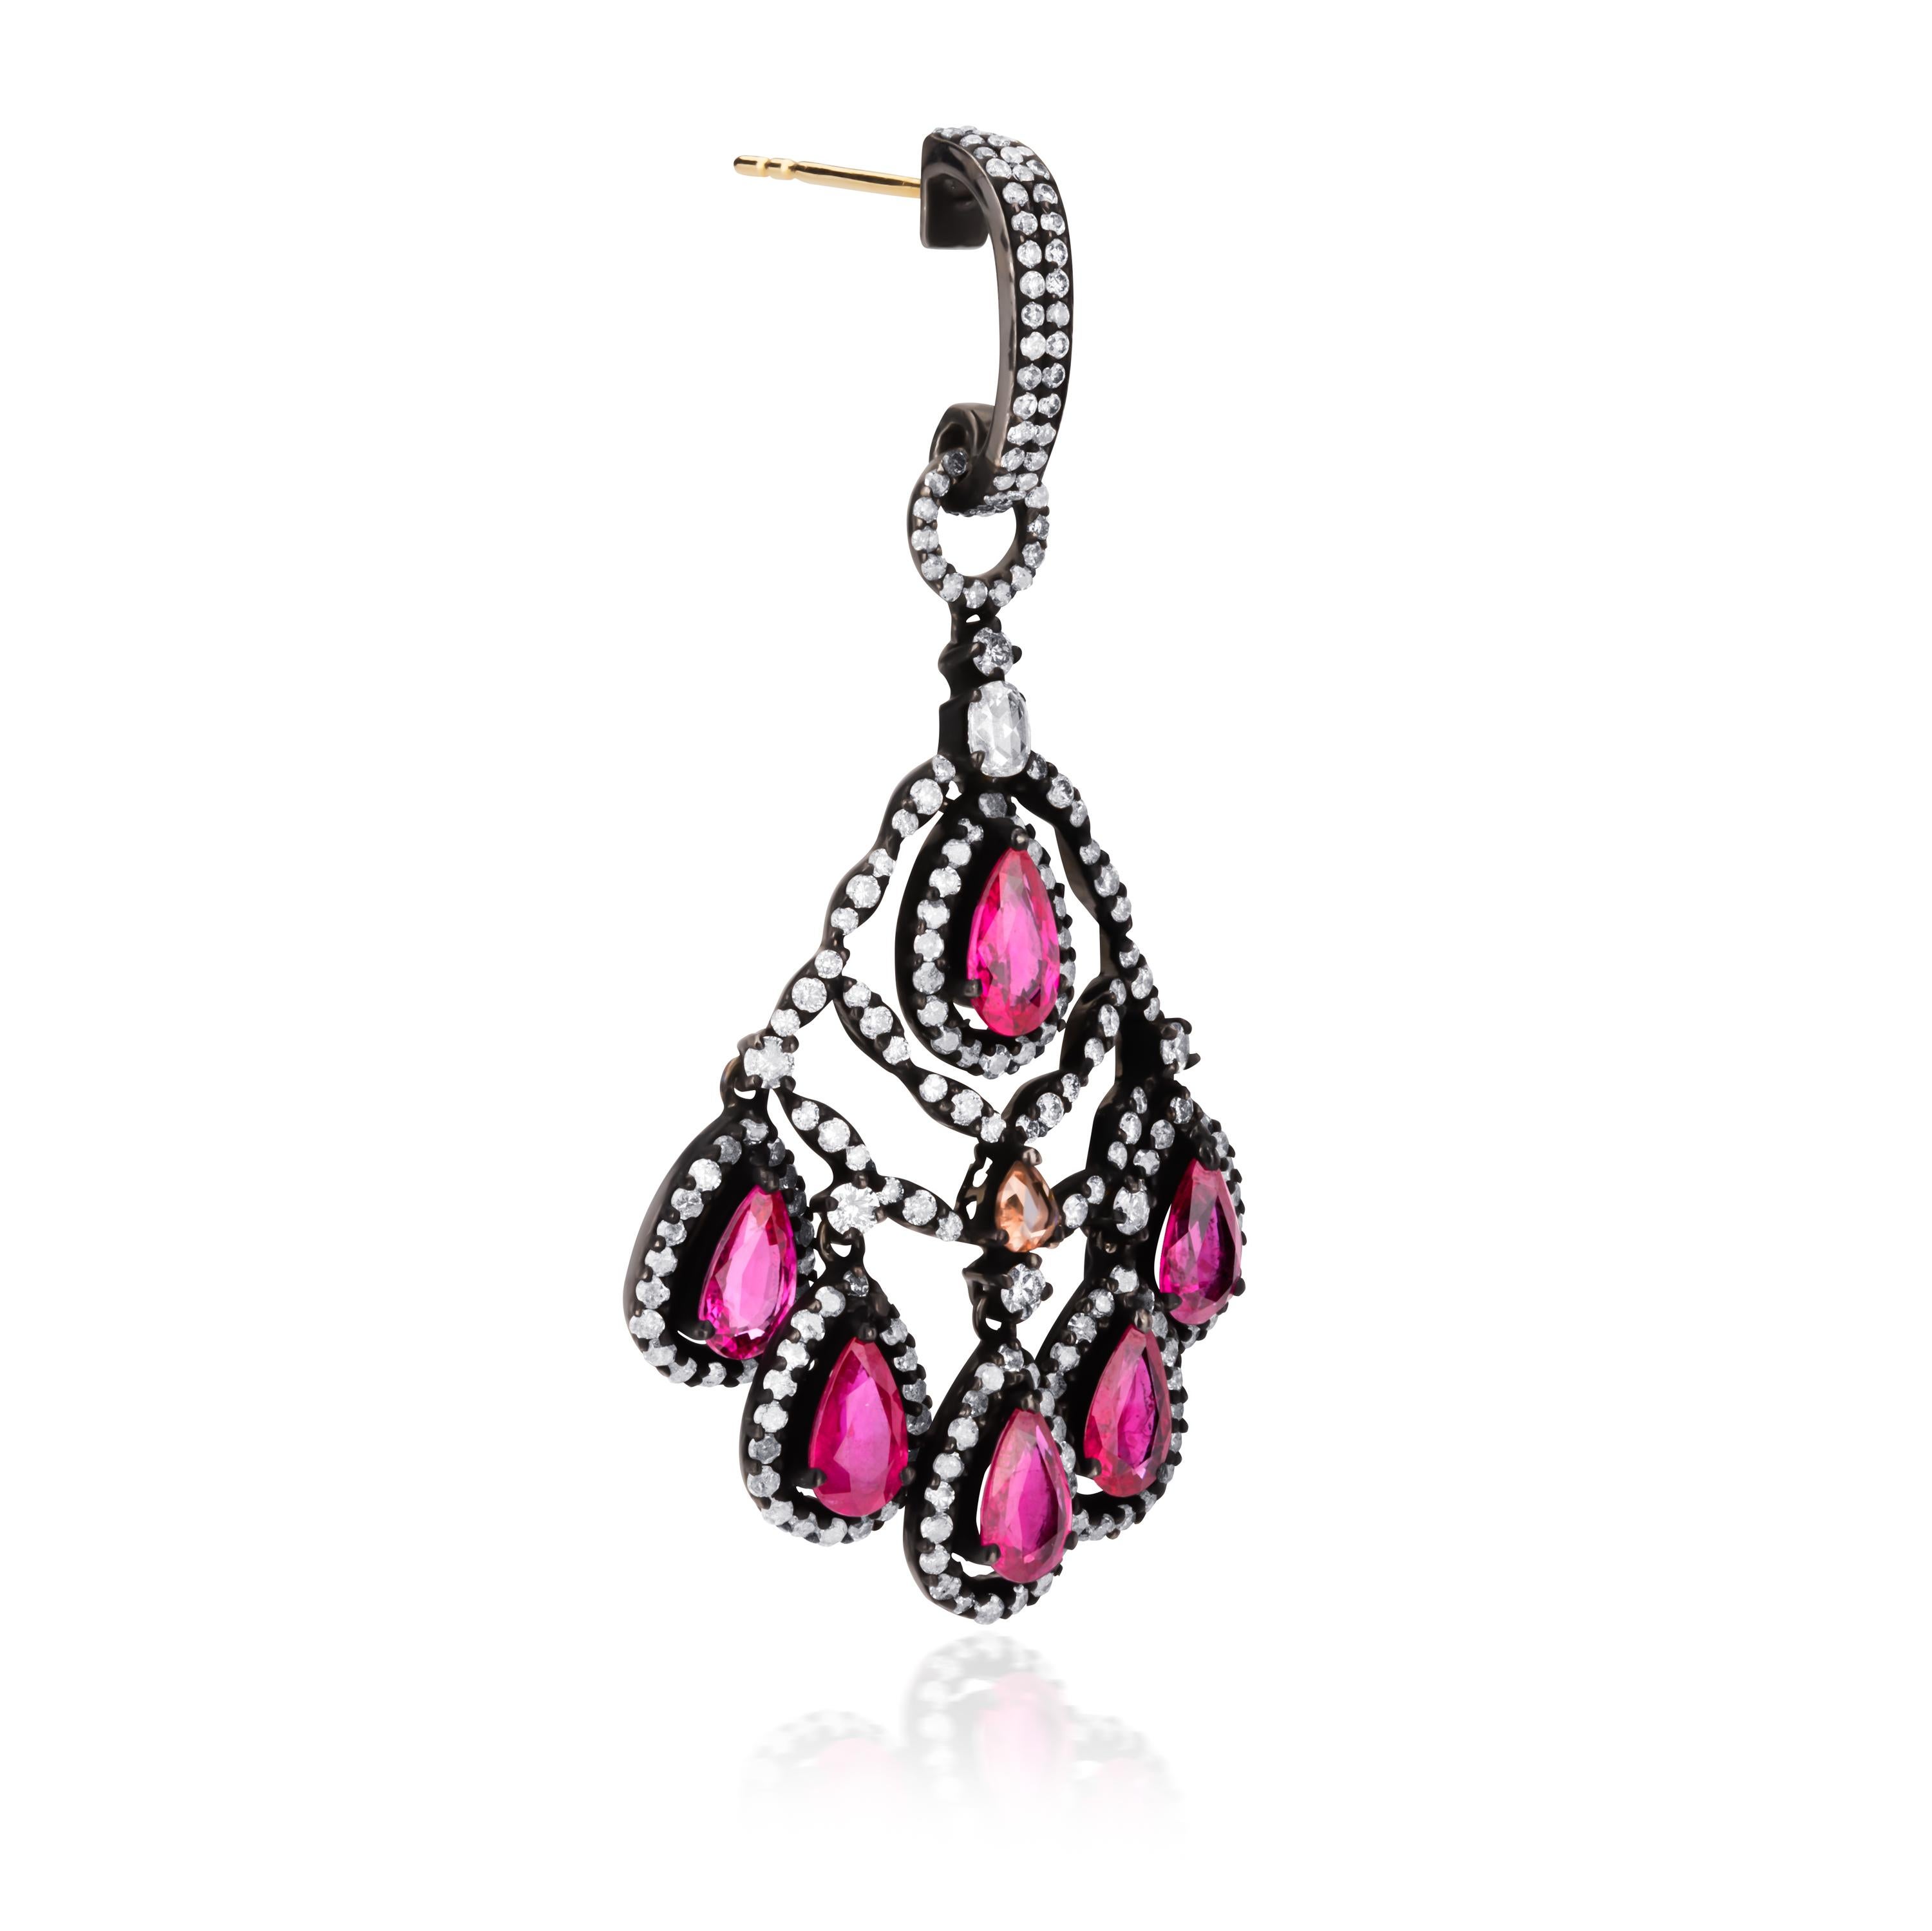 Victorian 10.61cttw Pear Ruby and Diamond Chandelier Earrings For Sale 1